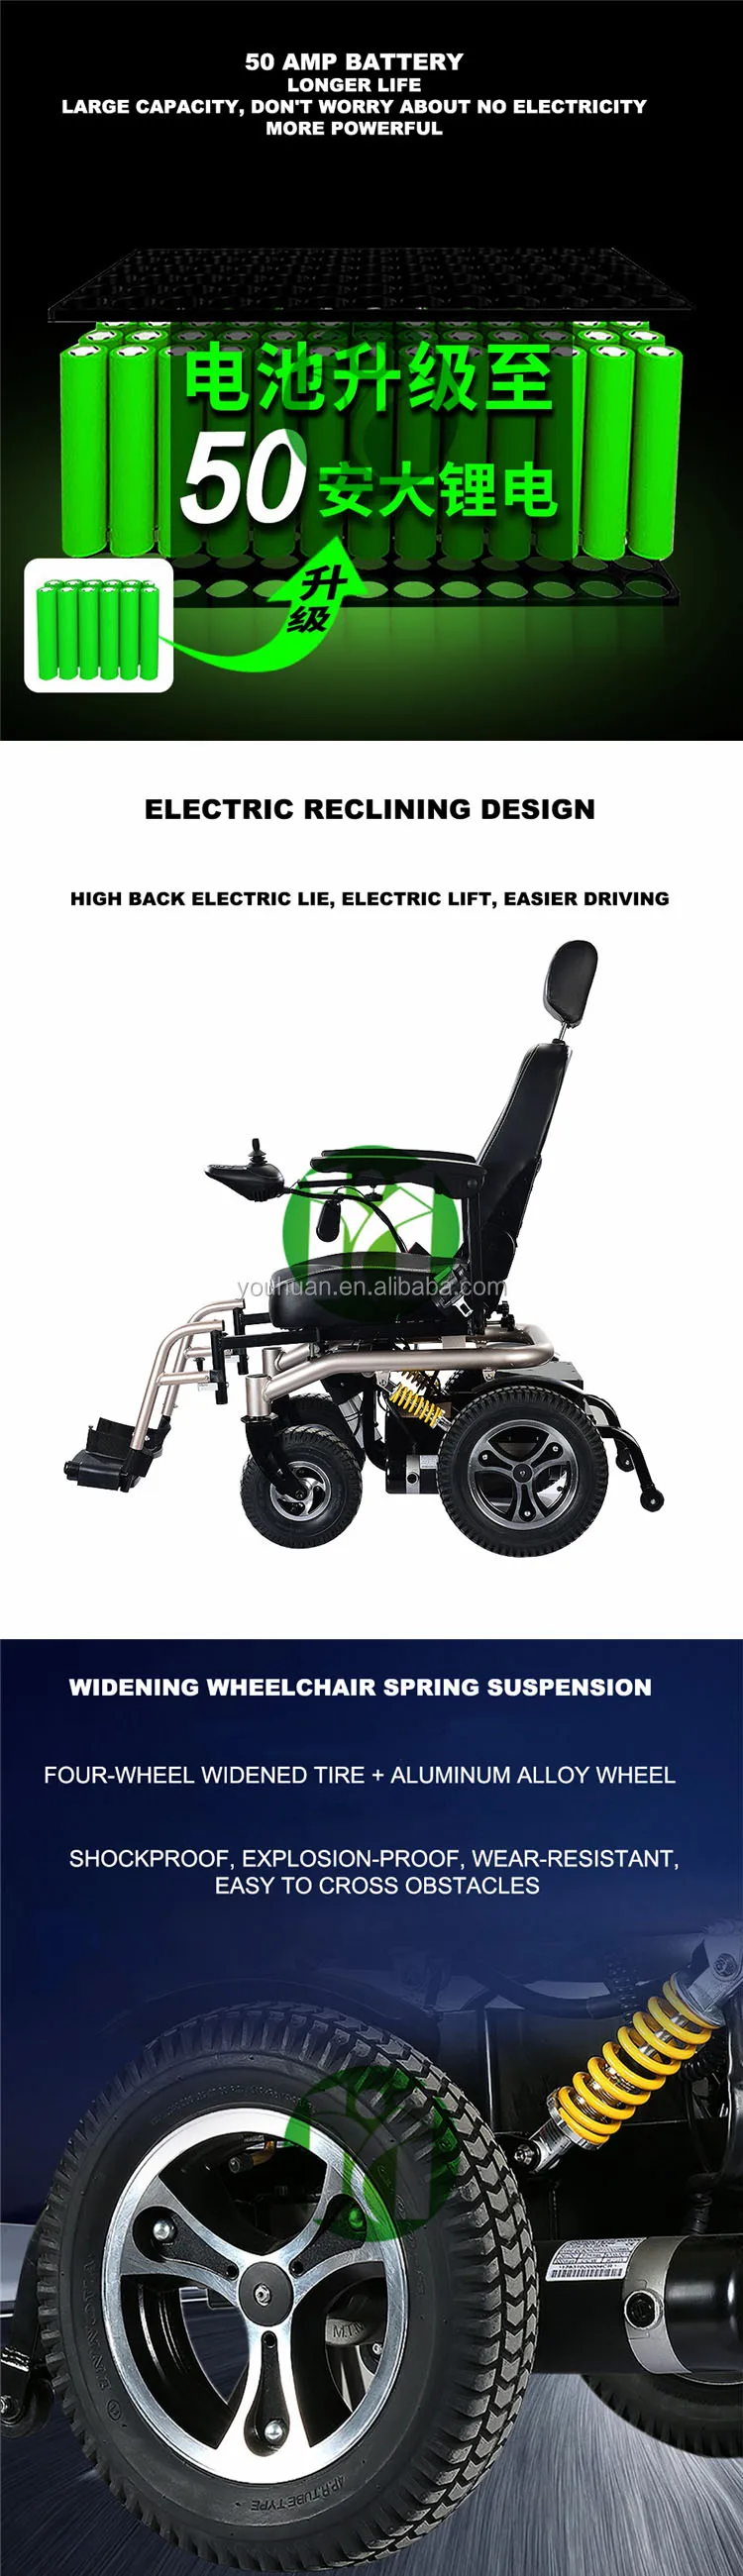 Electric power wheelchair with bag for travel use